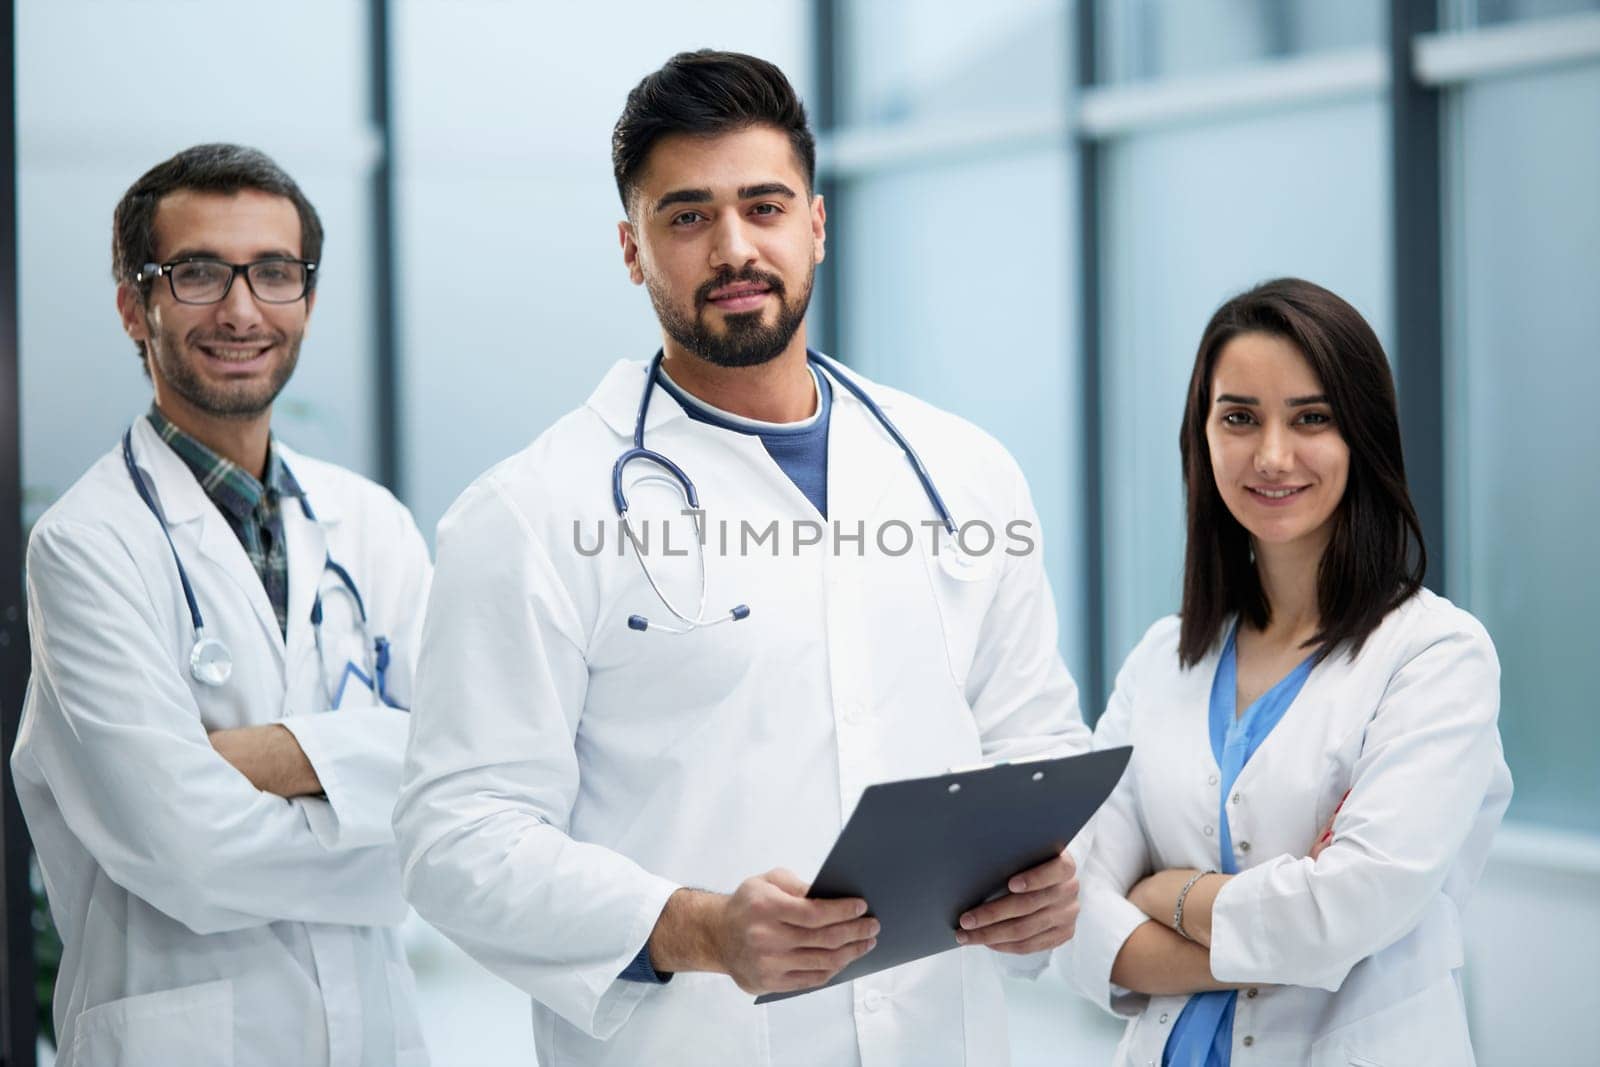 Three medical colleagues stand in the lobby of the hospital